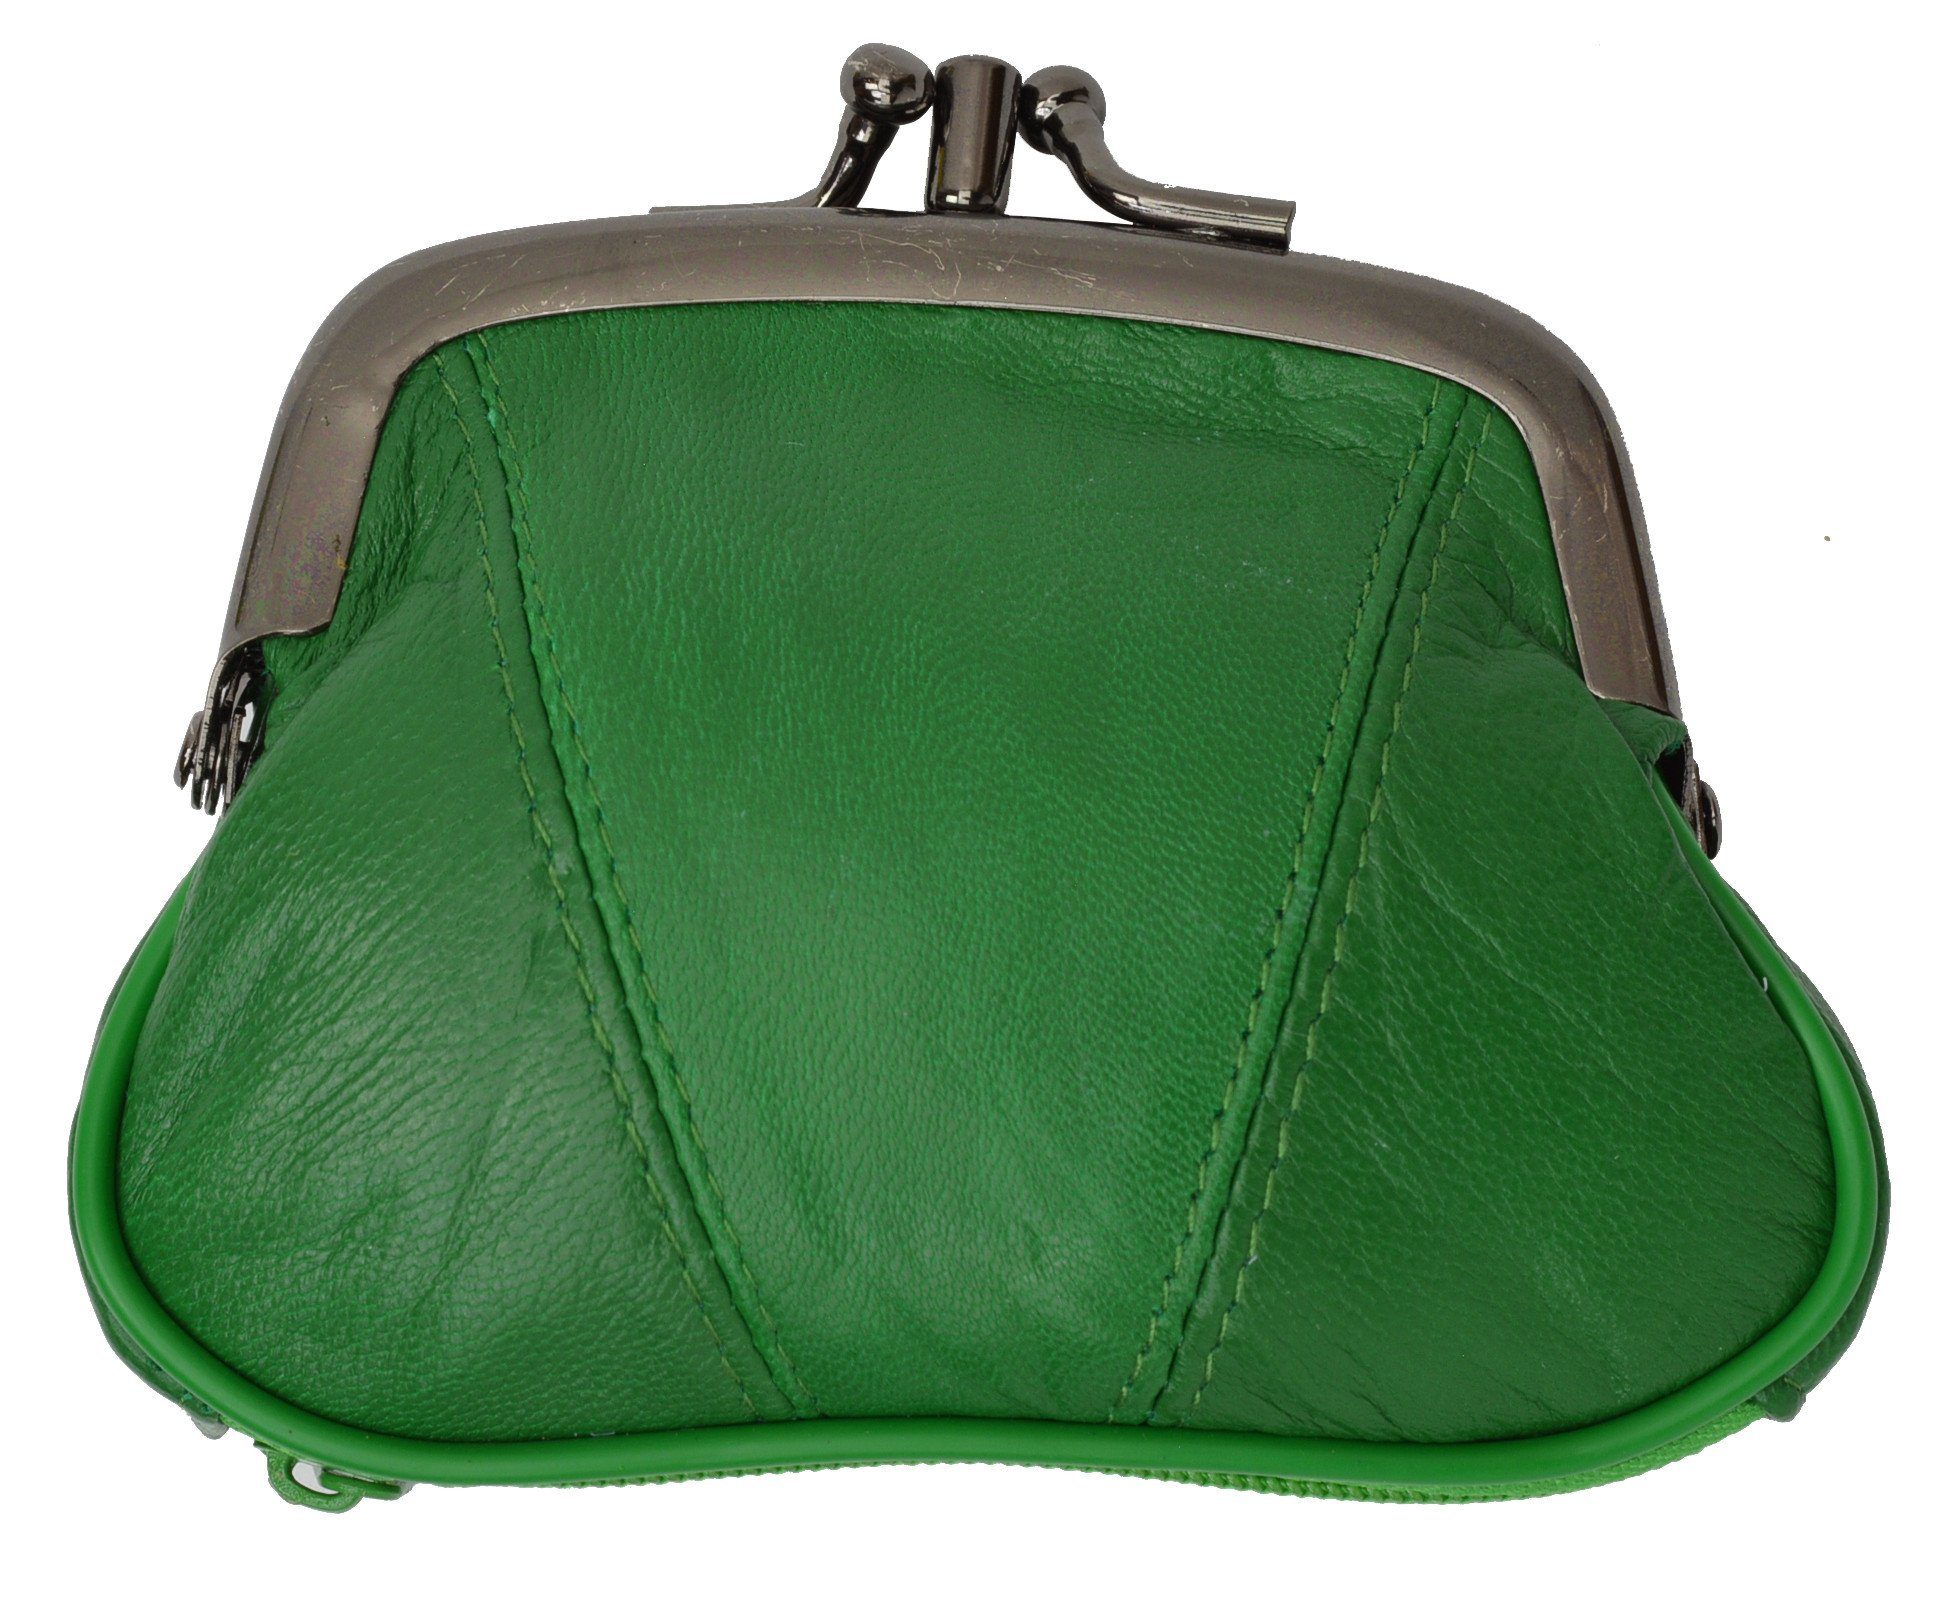 Wallet - Colors and Style Classic Leather Change Purse